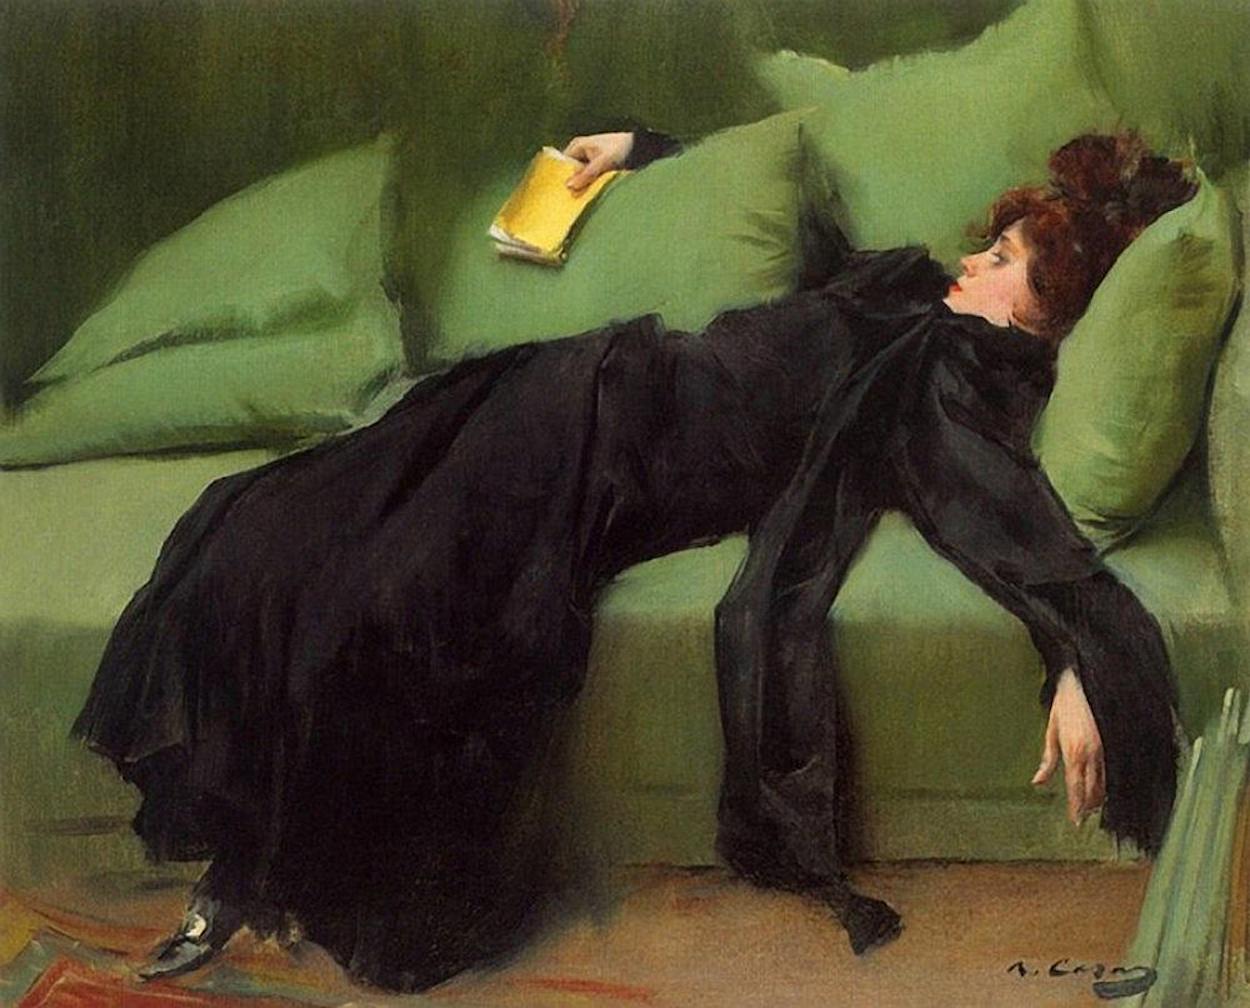 The Young Decadent. After the Ball by Ramon Casas - 1899 - 46.5 x 56 cm. The Museum of Montserrat